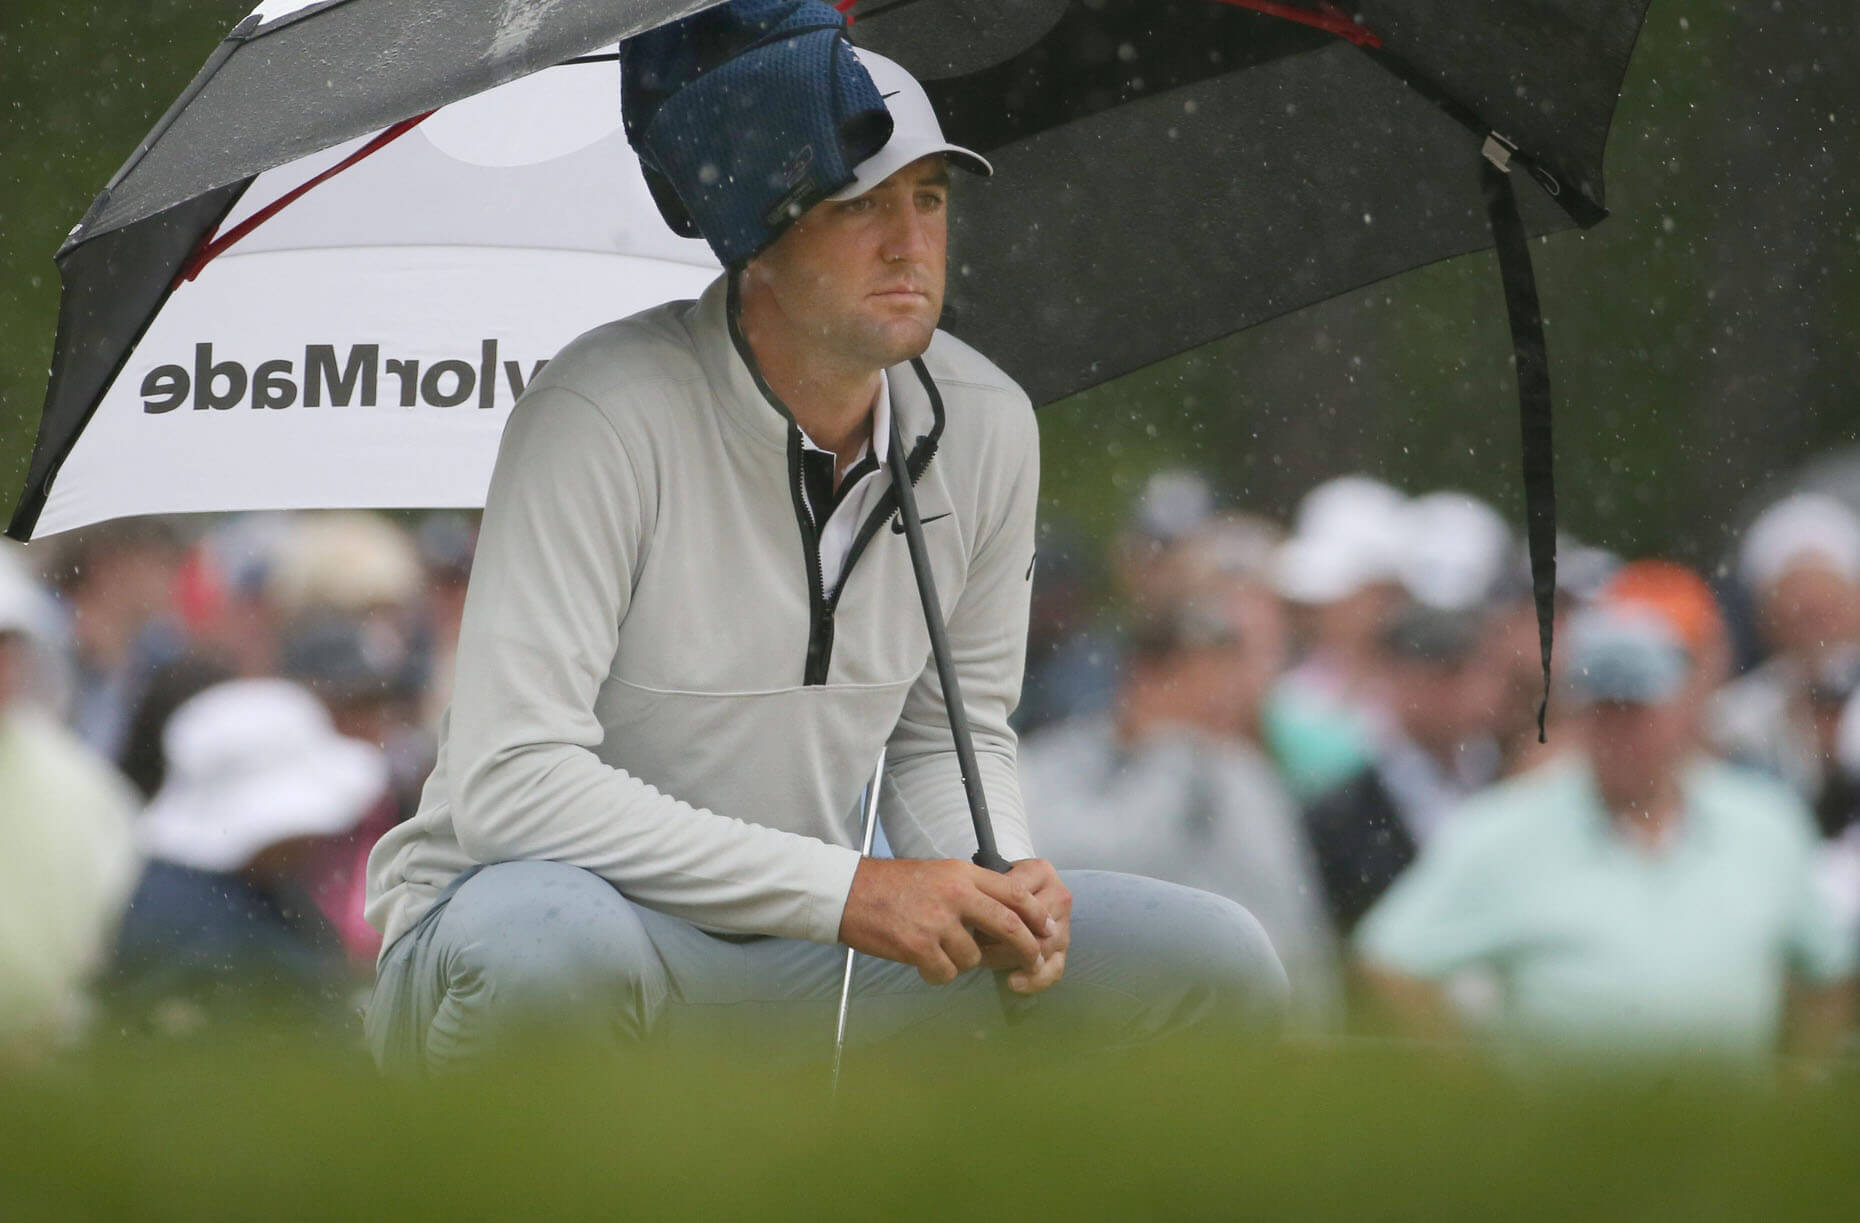 How To Bet - PGA Championship Weather: Rain for Round 2